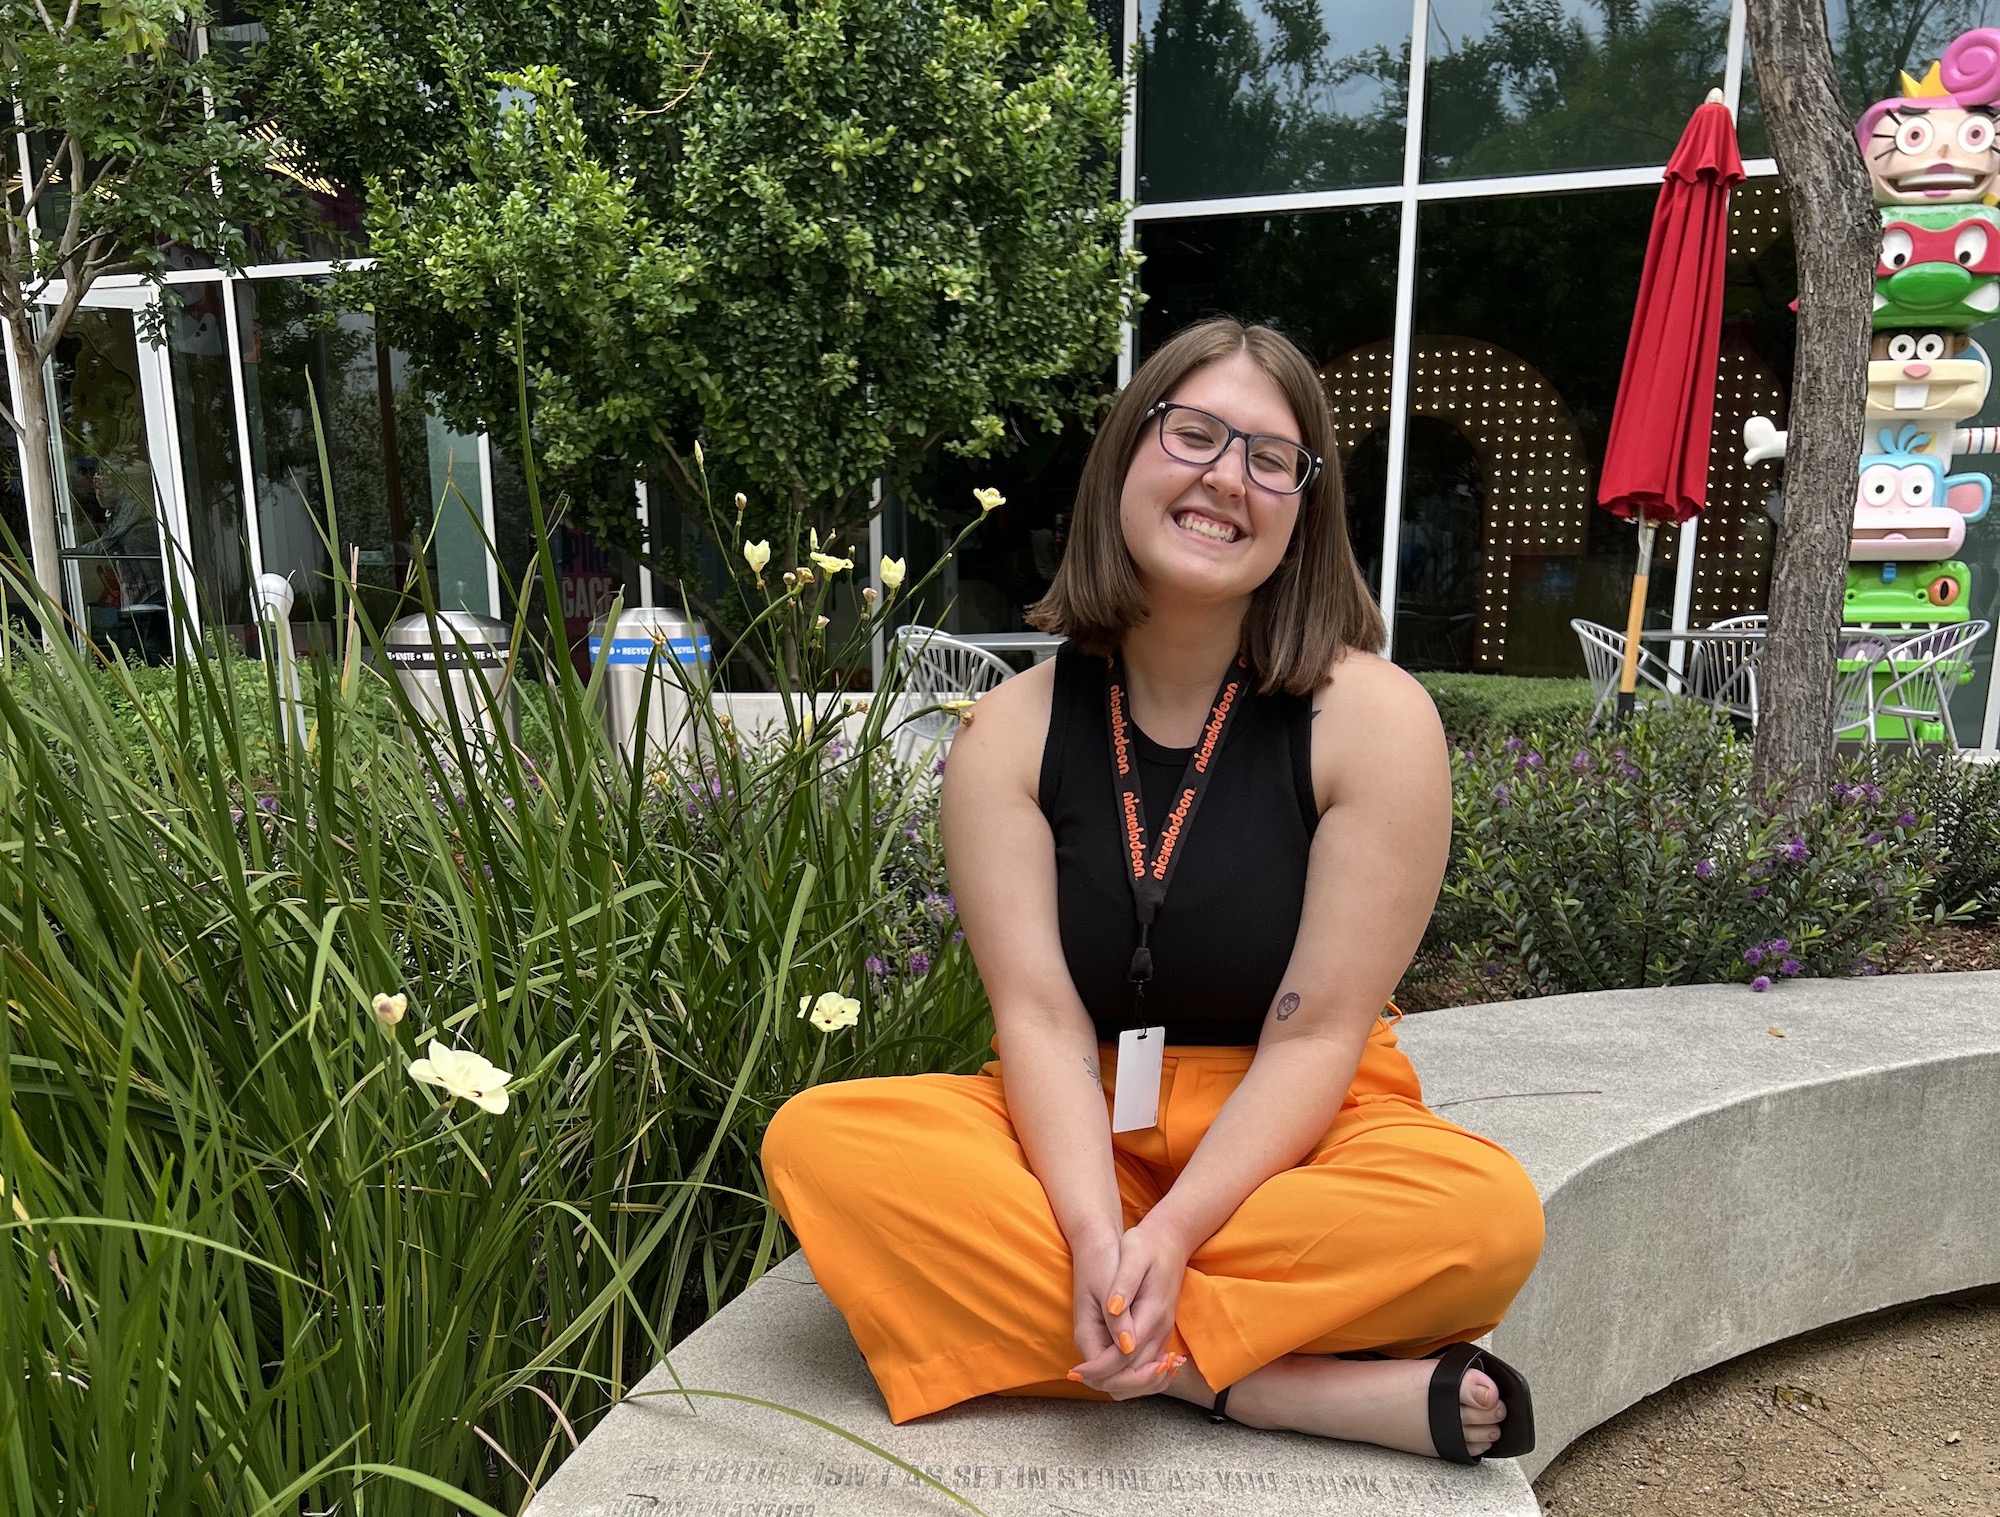 Allison Irey sits criss-crossed on an outside bench at Nickelodeon's campus, with character statues behind her